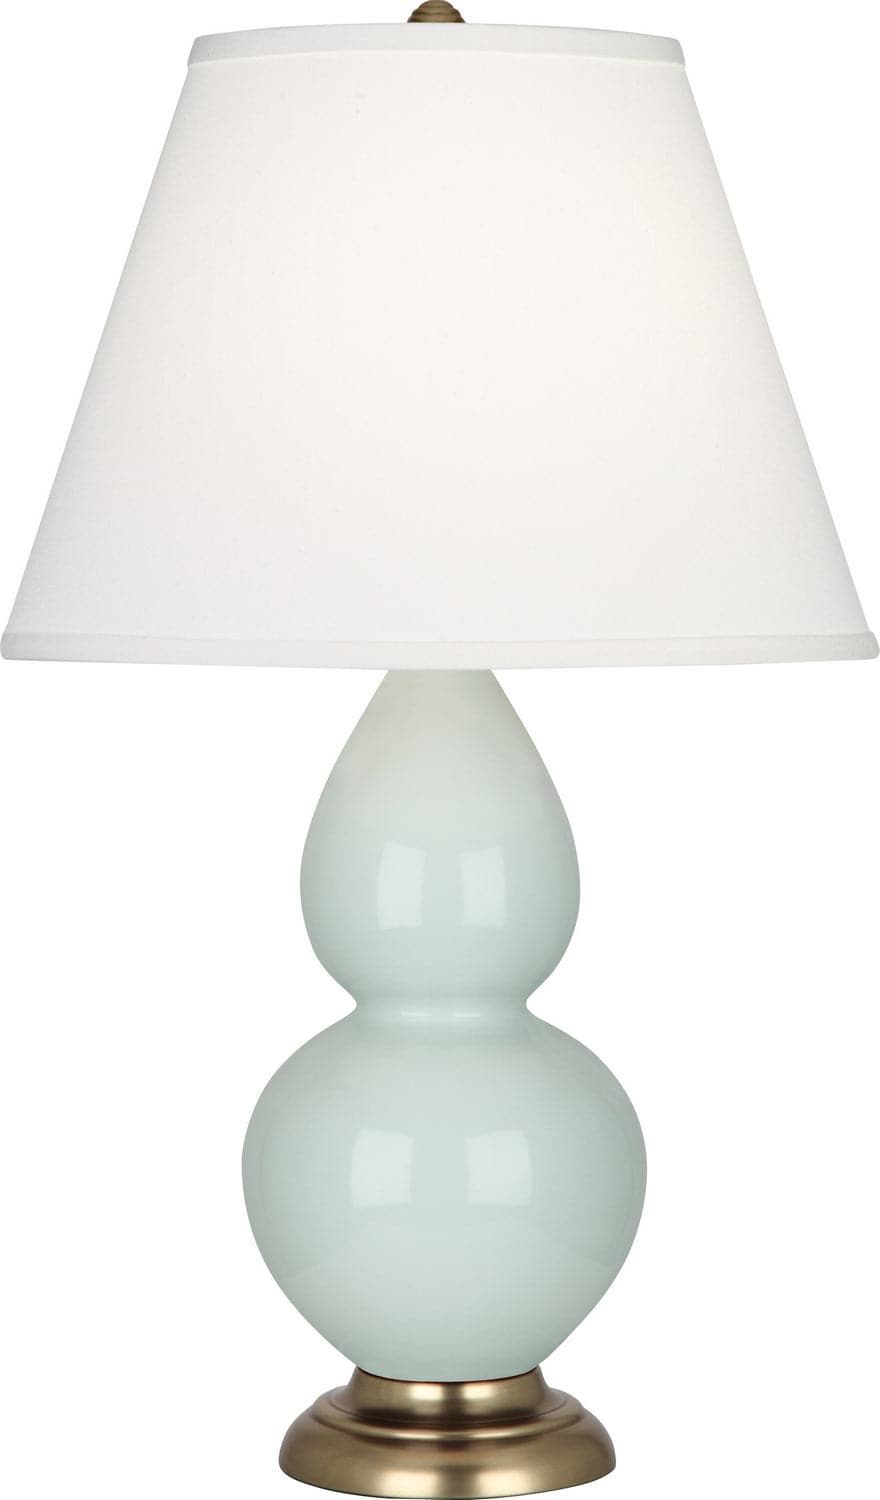 Robert Abbey - 1786X - One Light Accent Lamp - Small Double Gourd - Celadon Glazed w/Antique Natural Brass